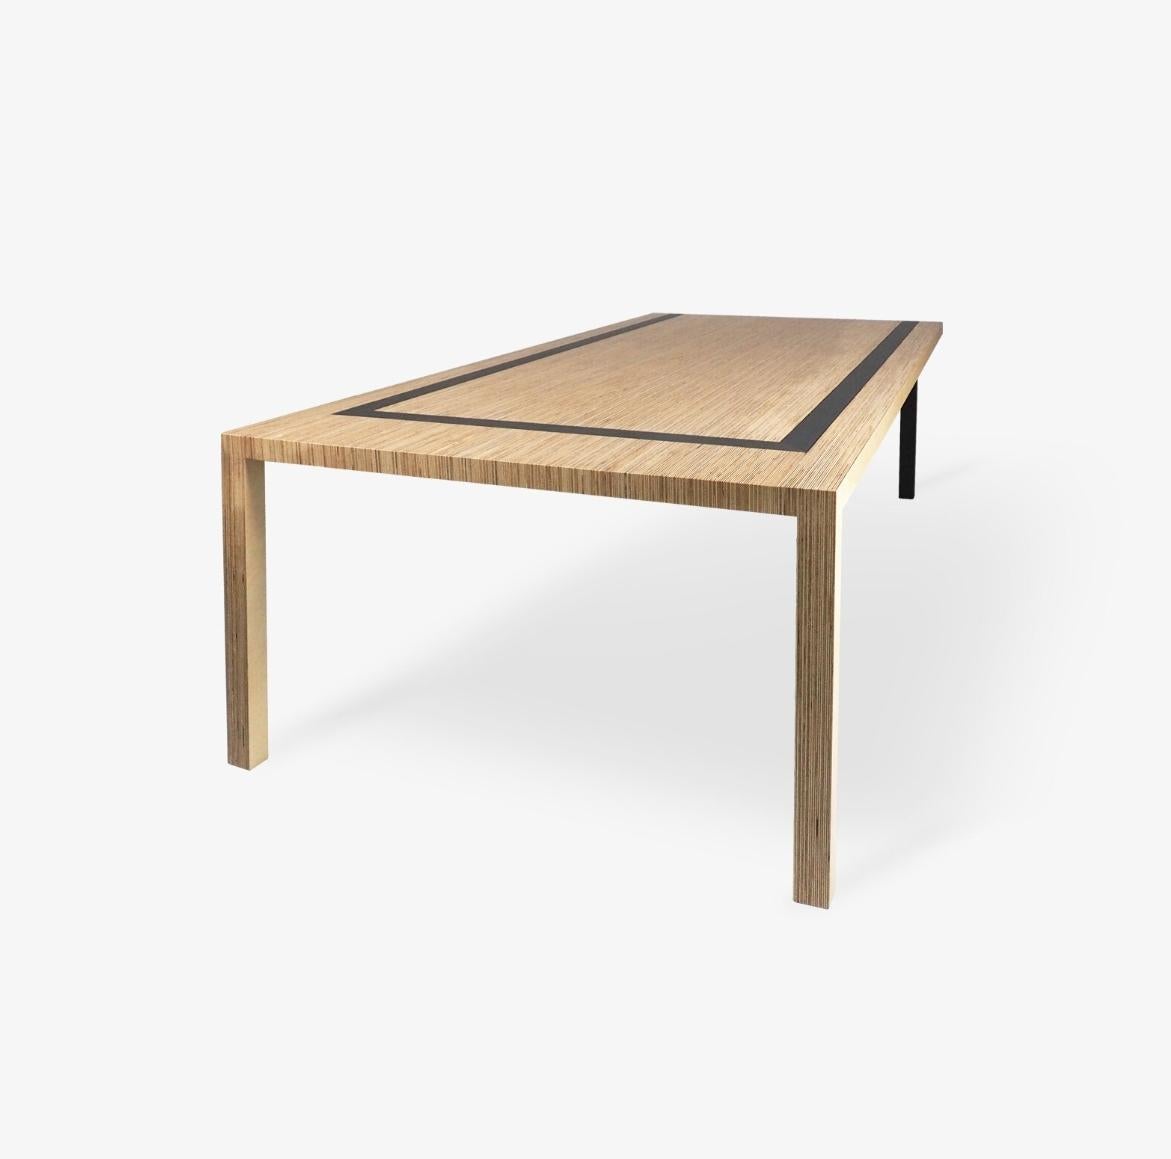 A “U” shape holds this table together forming a dynamic and asymmetrical piece. Each pair of legs is different, giving the table a different look on each side.

It’s minimalistic elegance contrasts with strength.
This table also conceals extensive